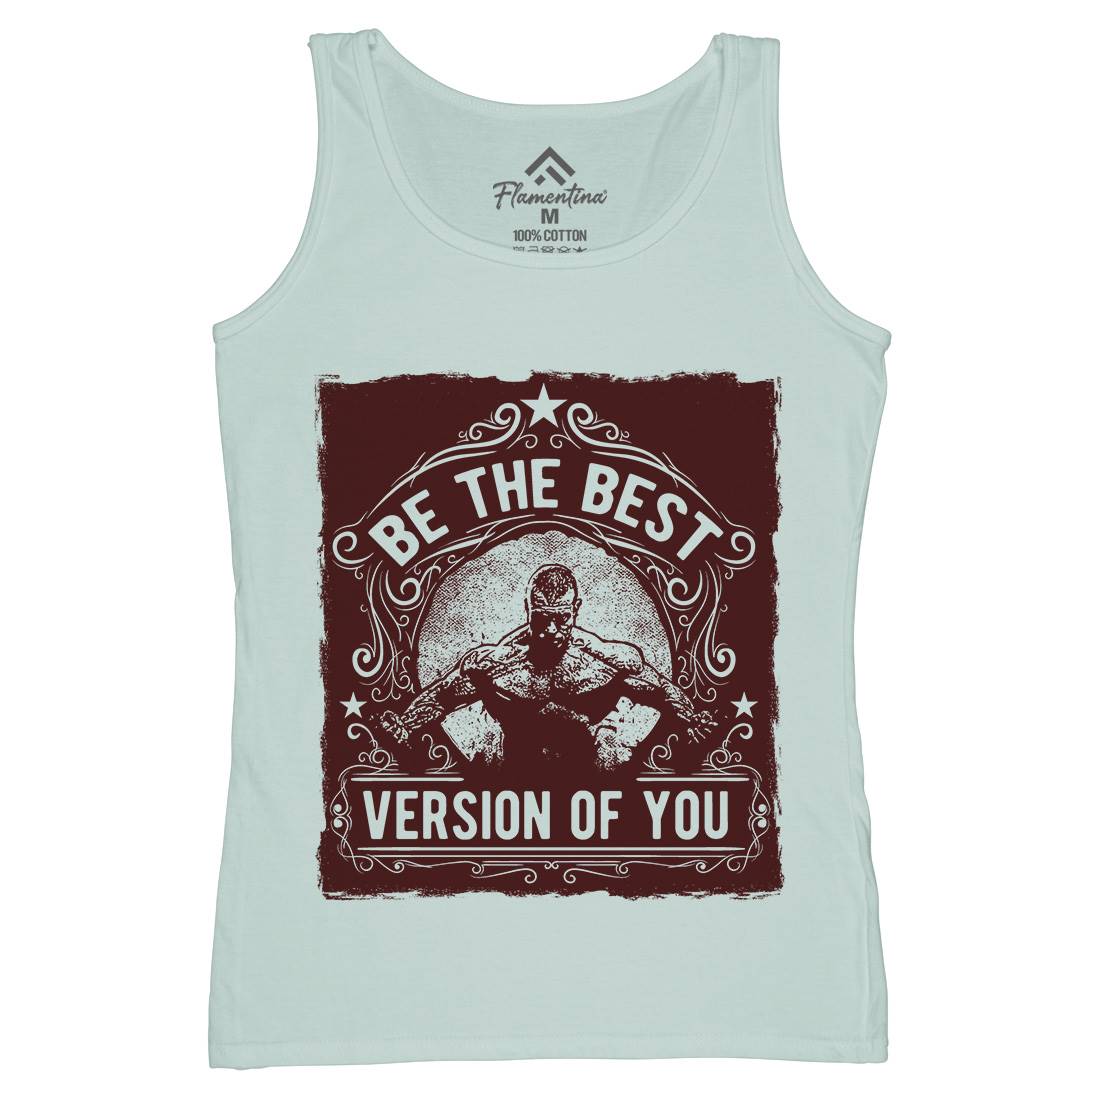 The Best Version Of You Womens Organic Tank Top Vest Gym C985